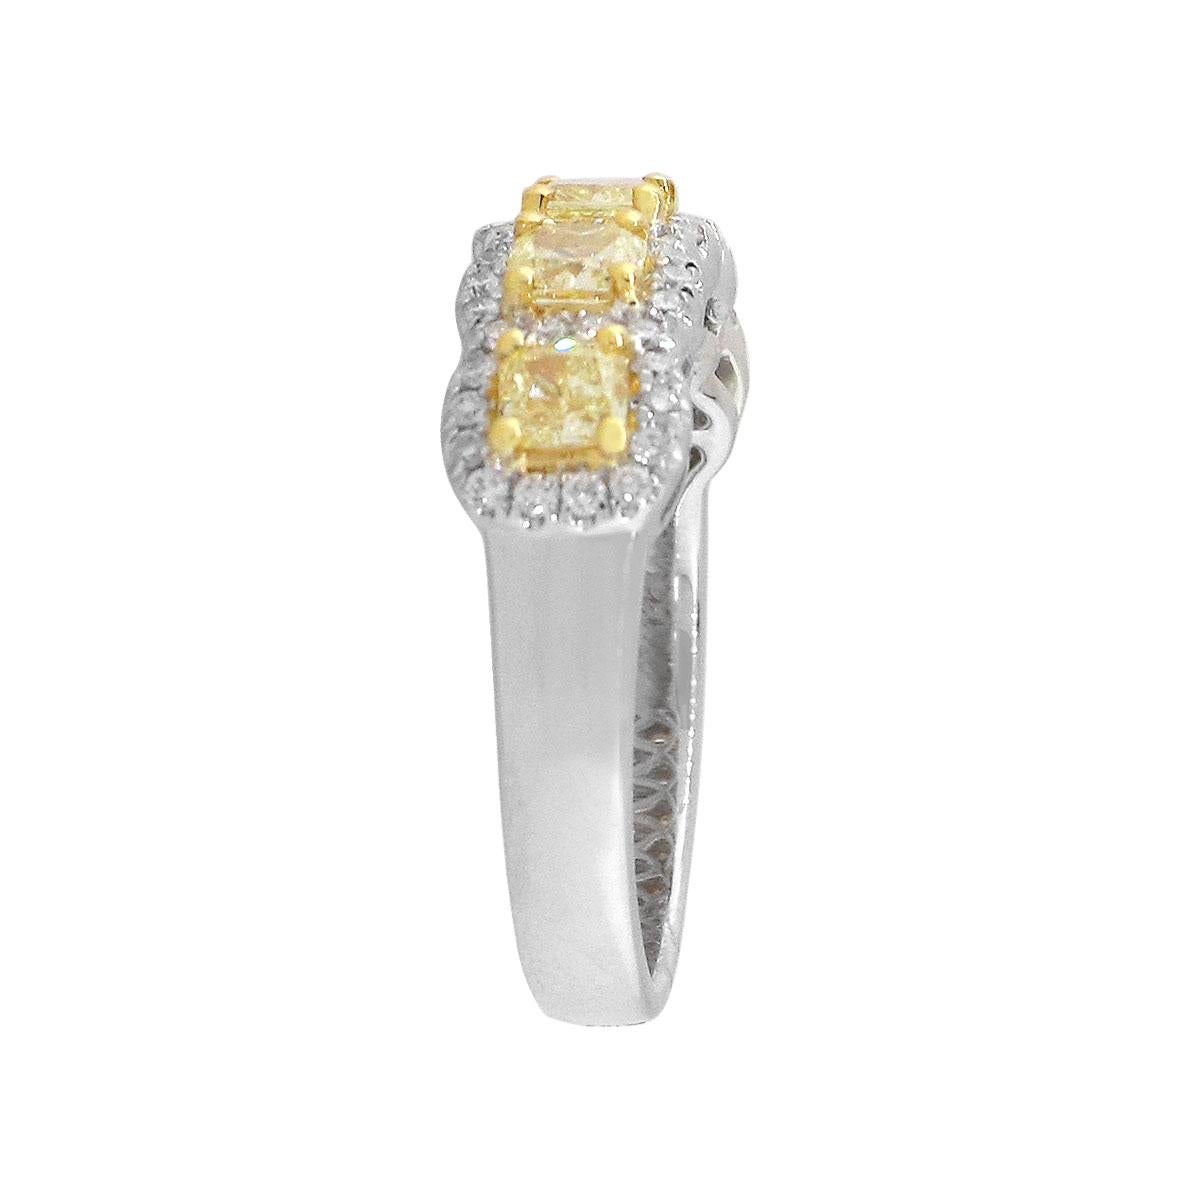 Material: 18k white gold
Cushion Diamond Details: Approx. 1.15ctw of Cushion cut diamonds. Diamonds are Fancy Yellow in color and VS in clarity
Round Diamond Details: Approx. 0.35ctw of round cut diamonds. Diamonds are G/H in color and VS in